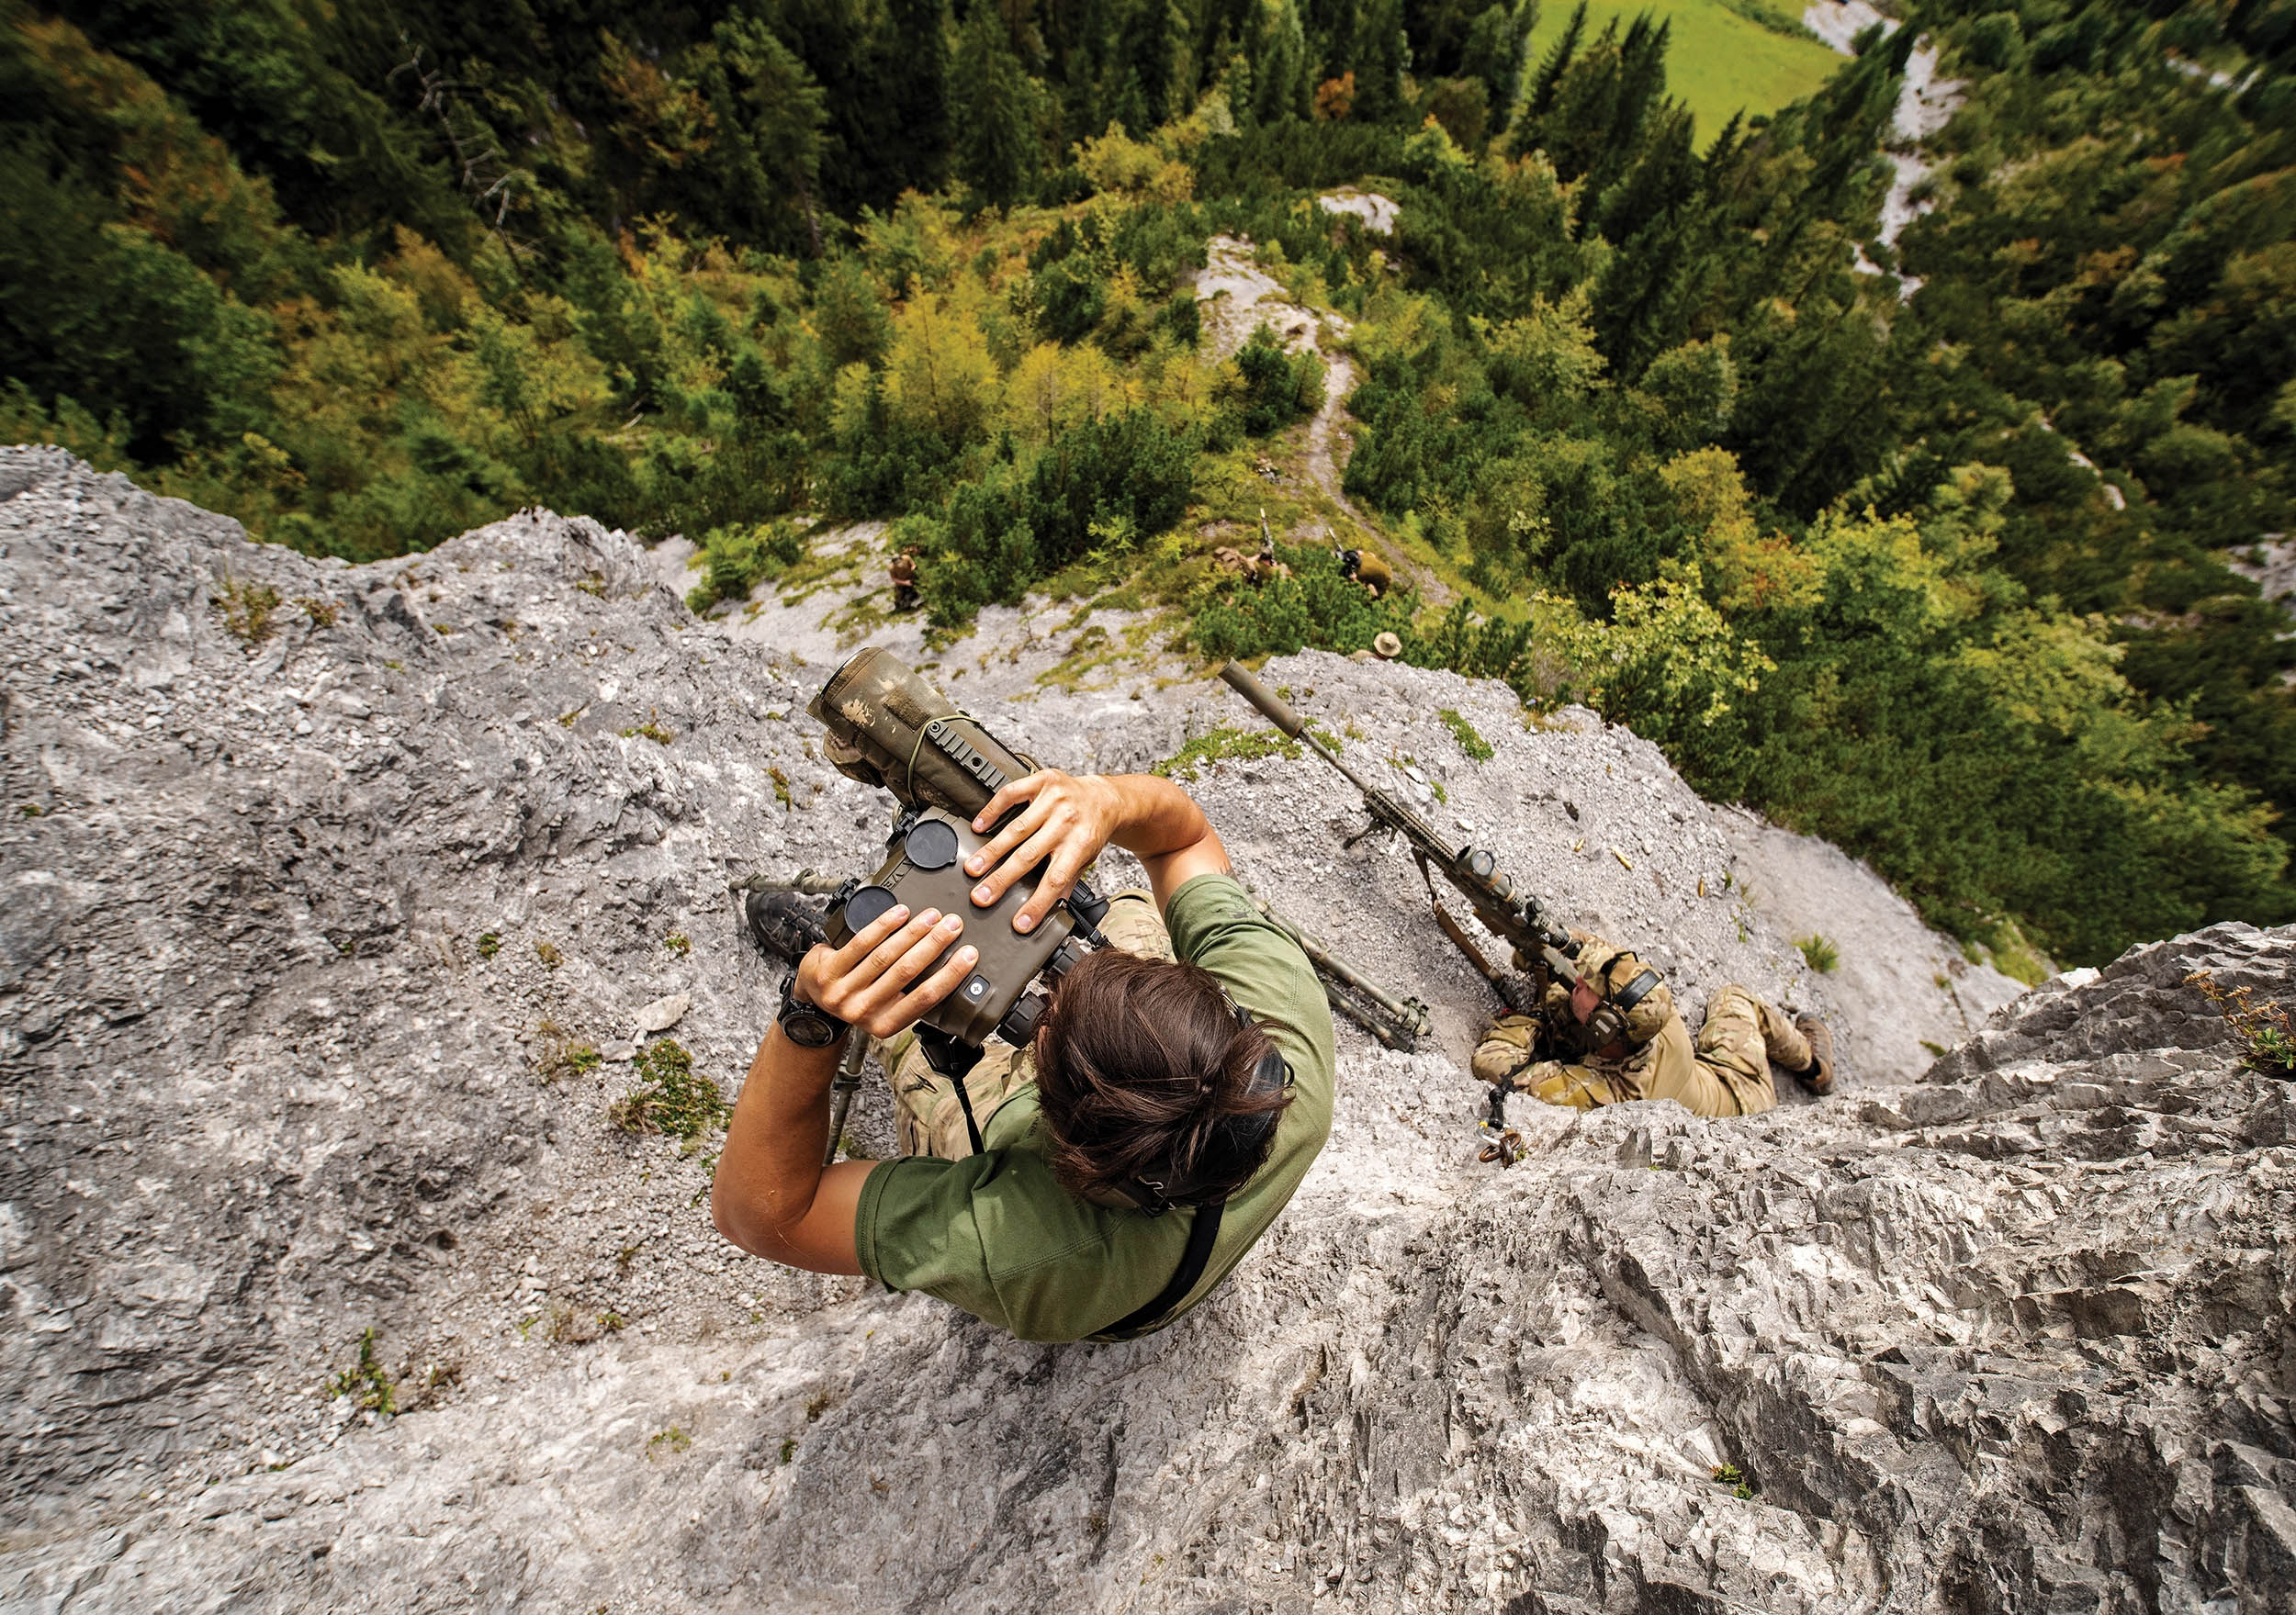 Belgian special forces sniper team identifies targets 2,000 meters away, September 11, 2018, during International Special Training Centre High-Angle/Urban Course, at Hochfilzen Training Area, Austria (U.S. Army/Benjamin Haulenbeek)